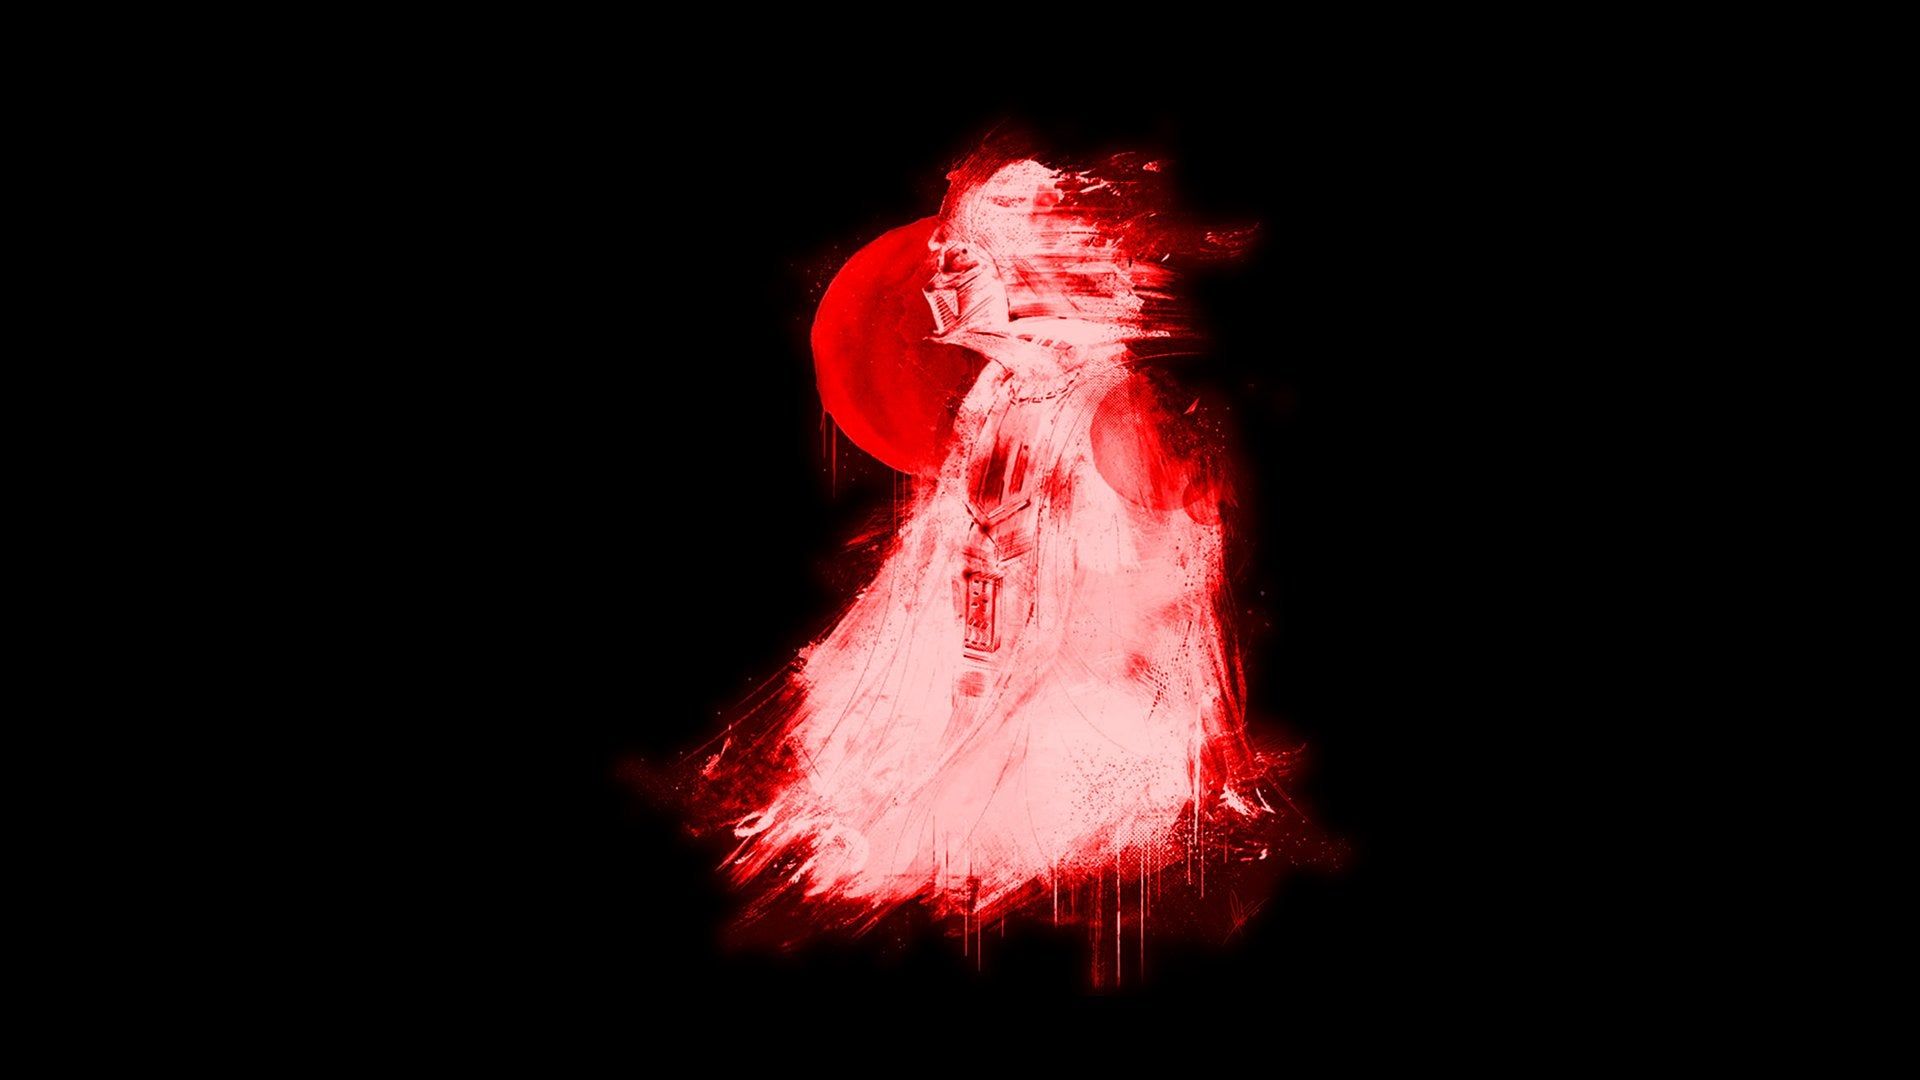 Dark and Red Colorized Version of Vader Amoled 1920x1080